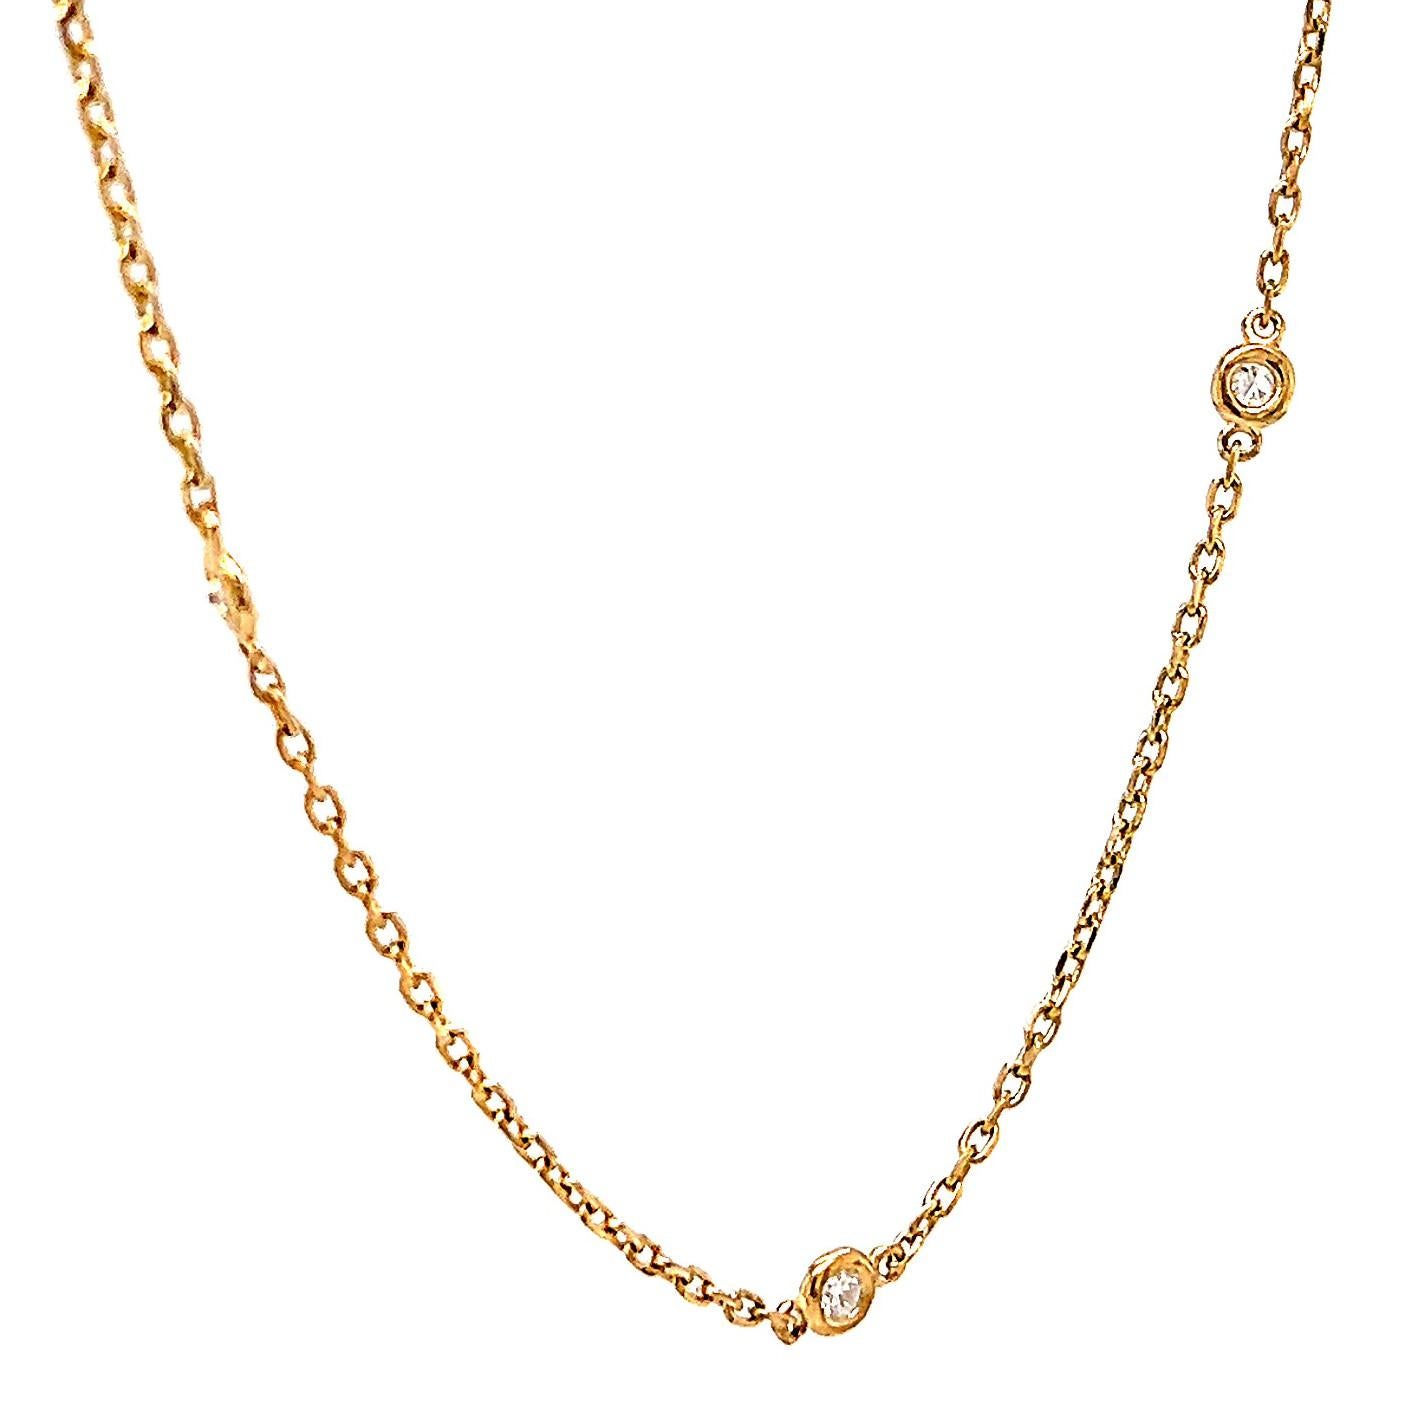 Women's or Men's 14 Karat Yellow Gold Diamonds By The Yard Chain Necklace